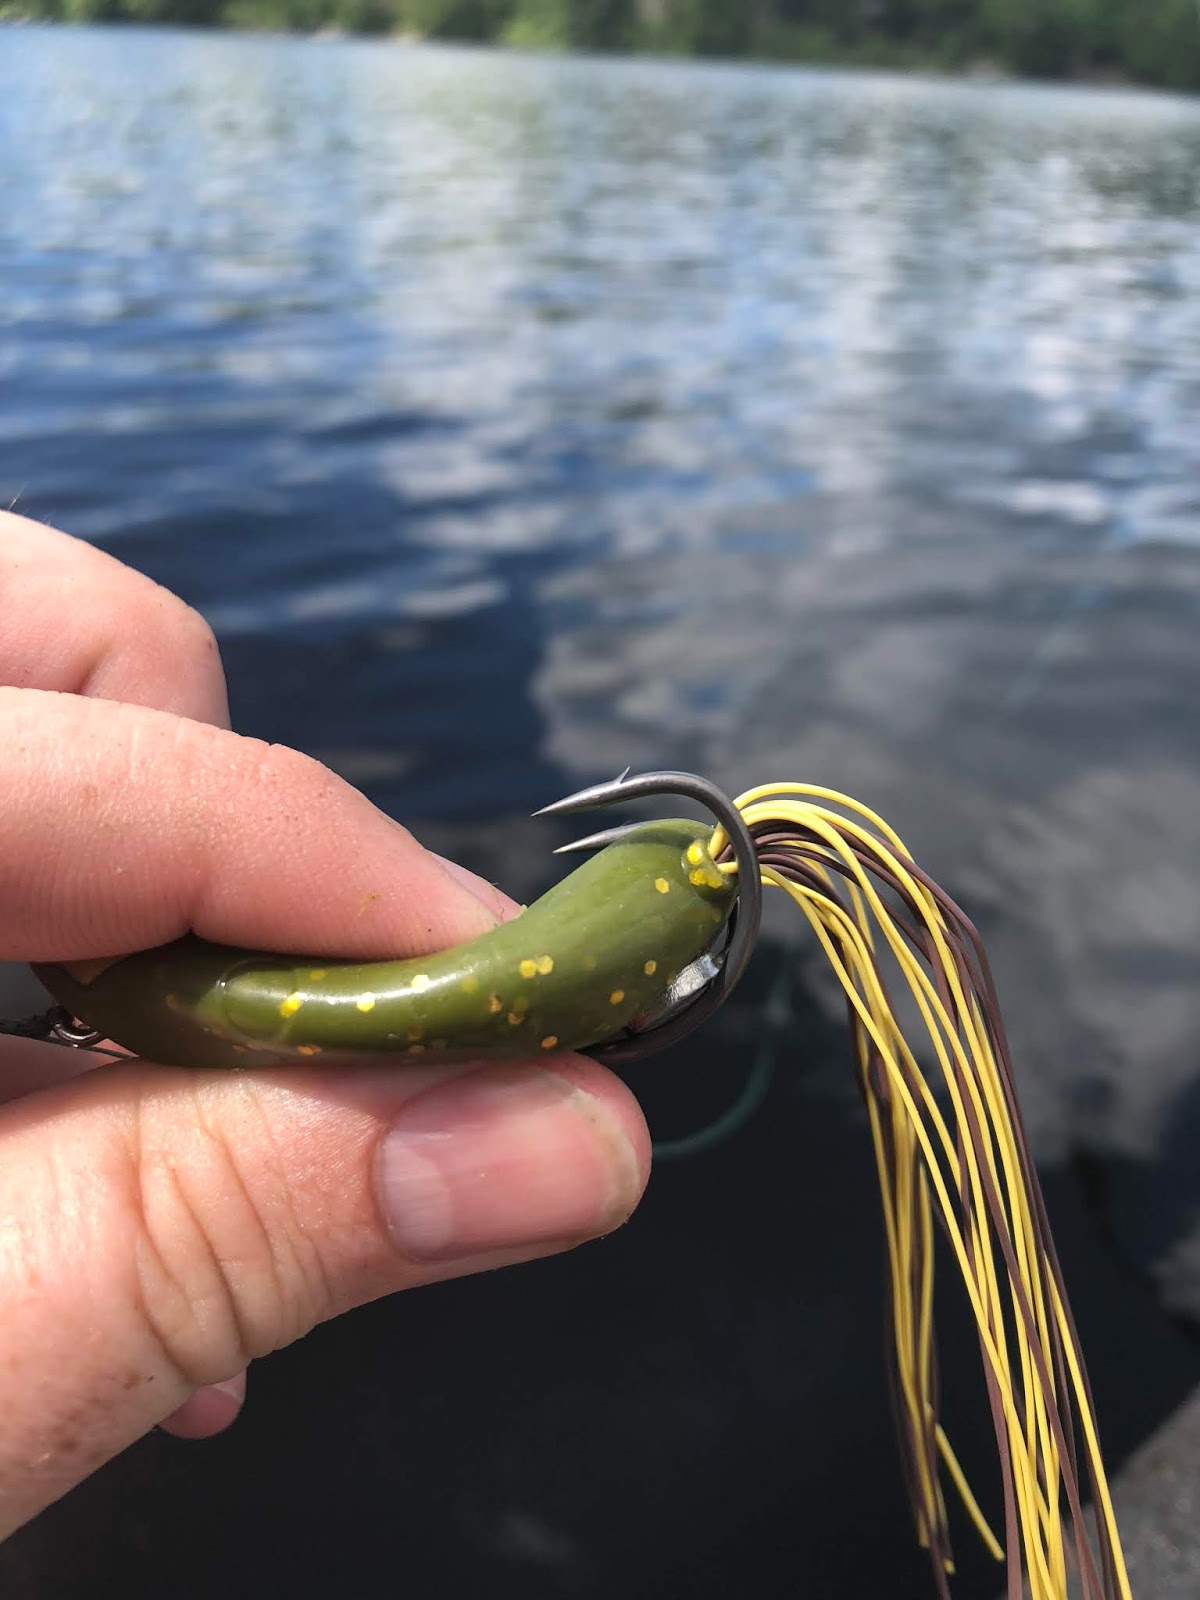 Bass Junkies Frog Pond: Yum Tip Toad Review